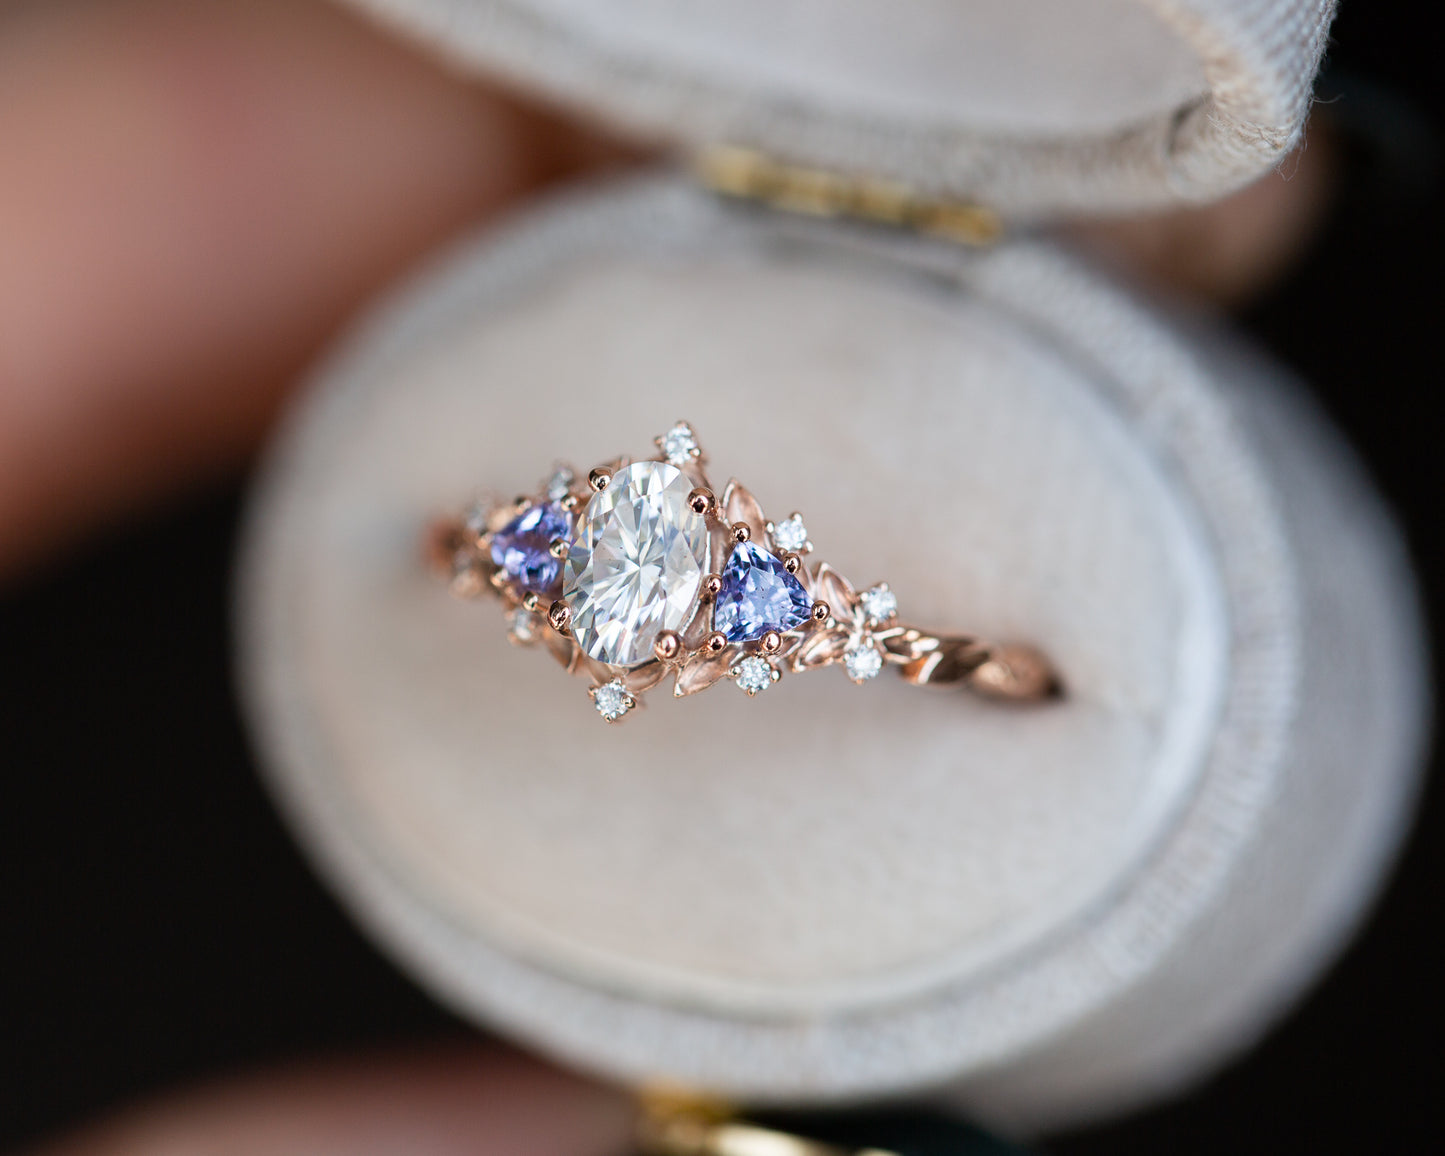 Briar rose three stone with oval moissanite and tanzanite (fairy queen ring)